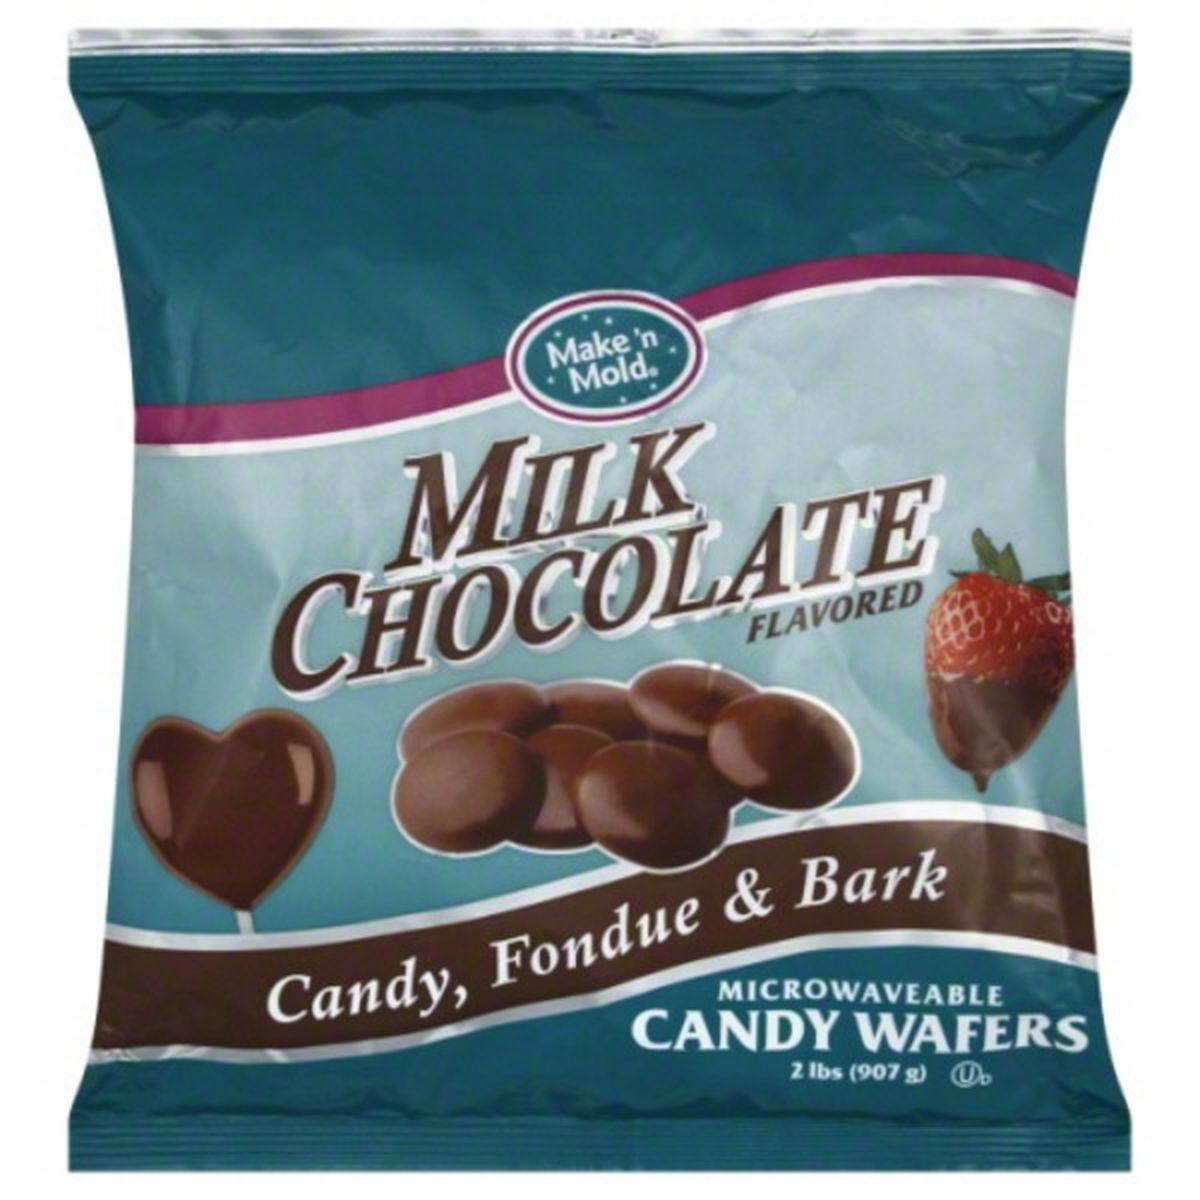 Calories in Make 'n Mold Candy Wafers, Milk Chocolate Flavored